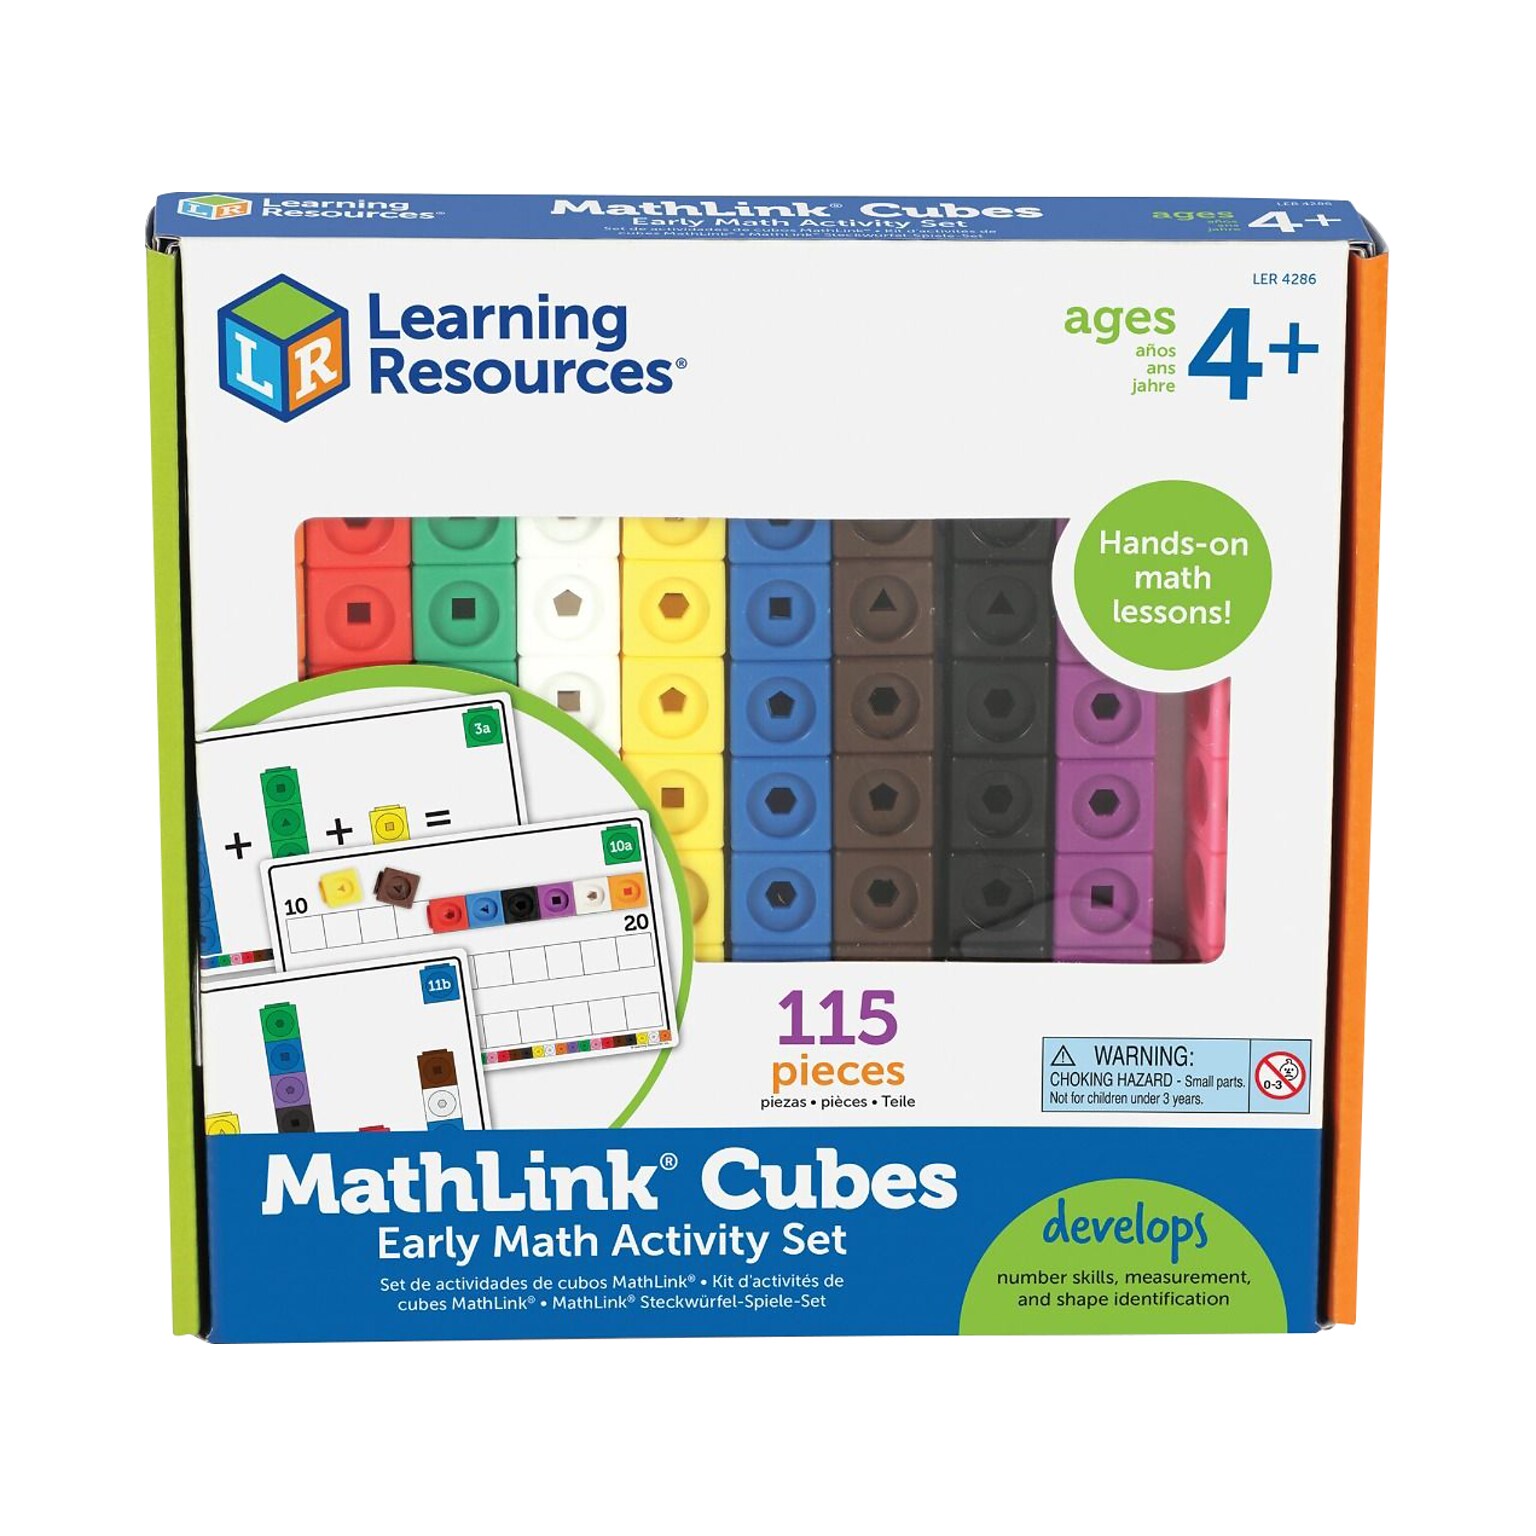 Learning Resources MathLink Cubes Early Math Activity Set, Assorted Colors, 115 Pieces/Set (LER 4286)